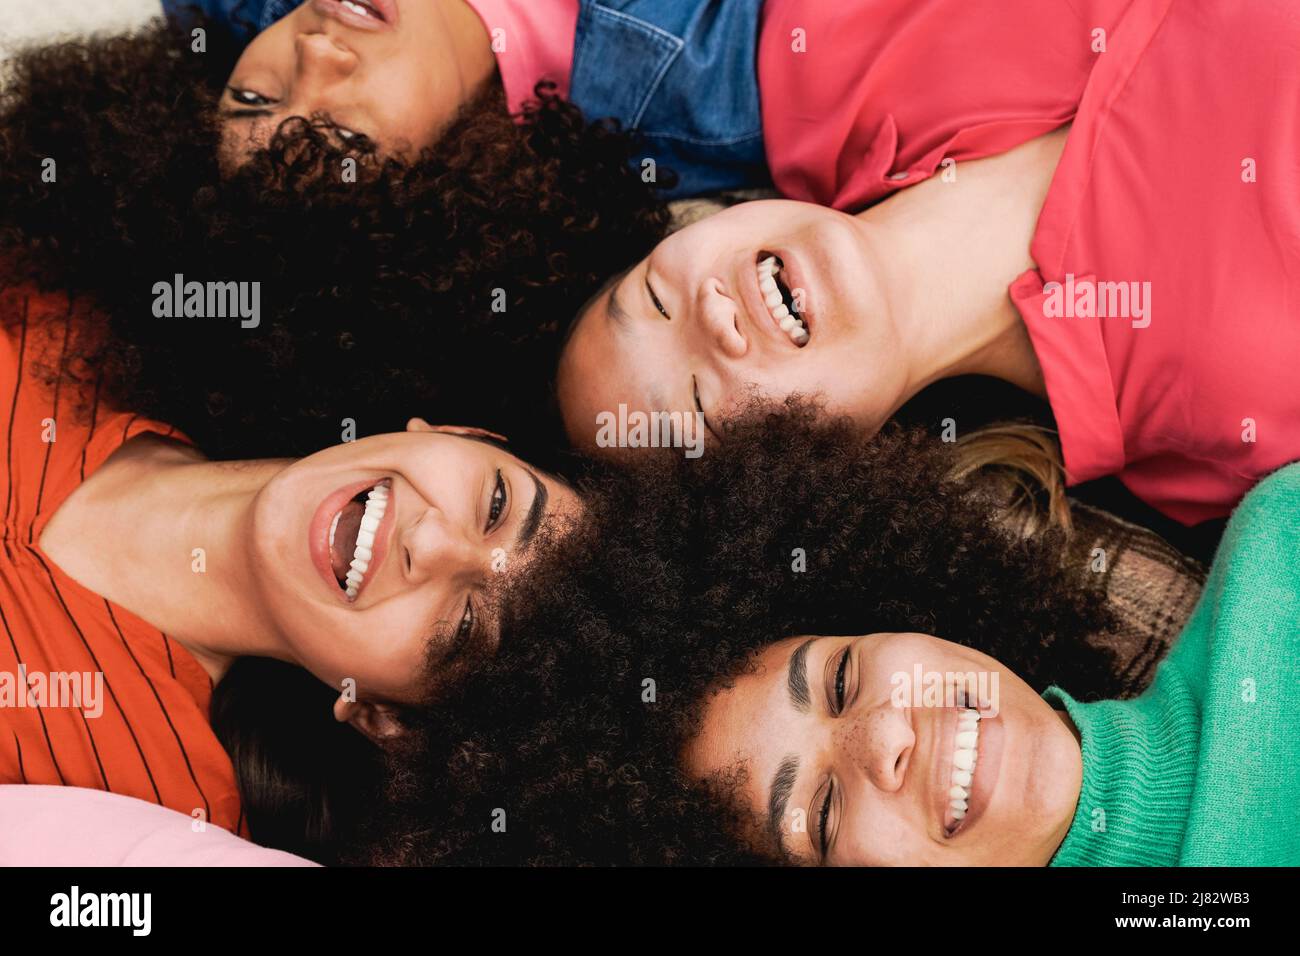 Multiethnic female friends having fun lying together in circle - Focus on right Hispanic girl Stock Photo